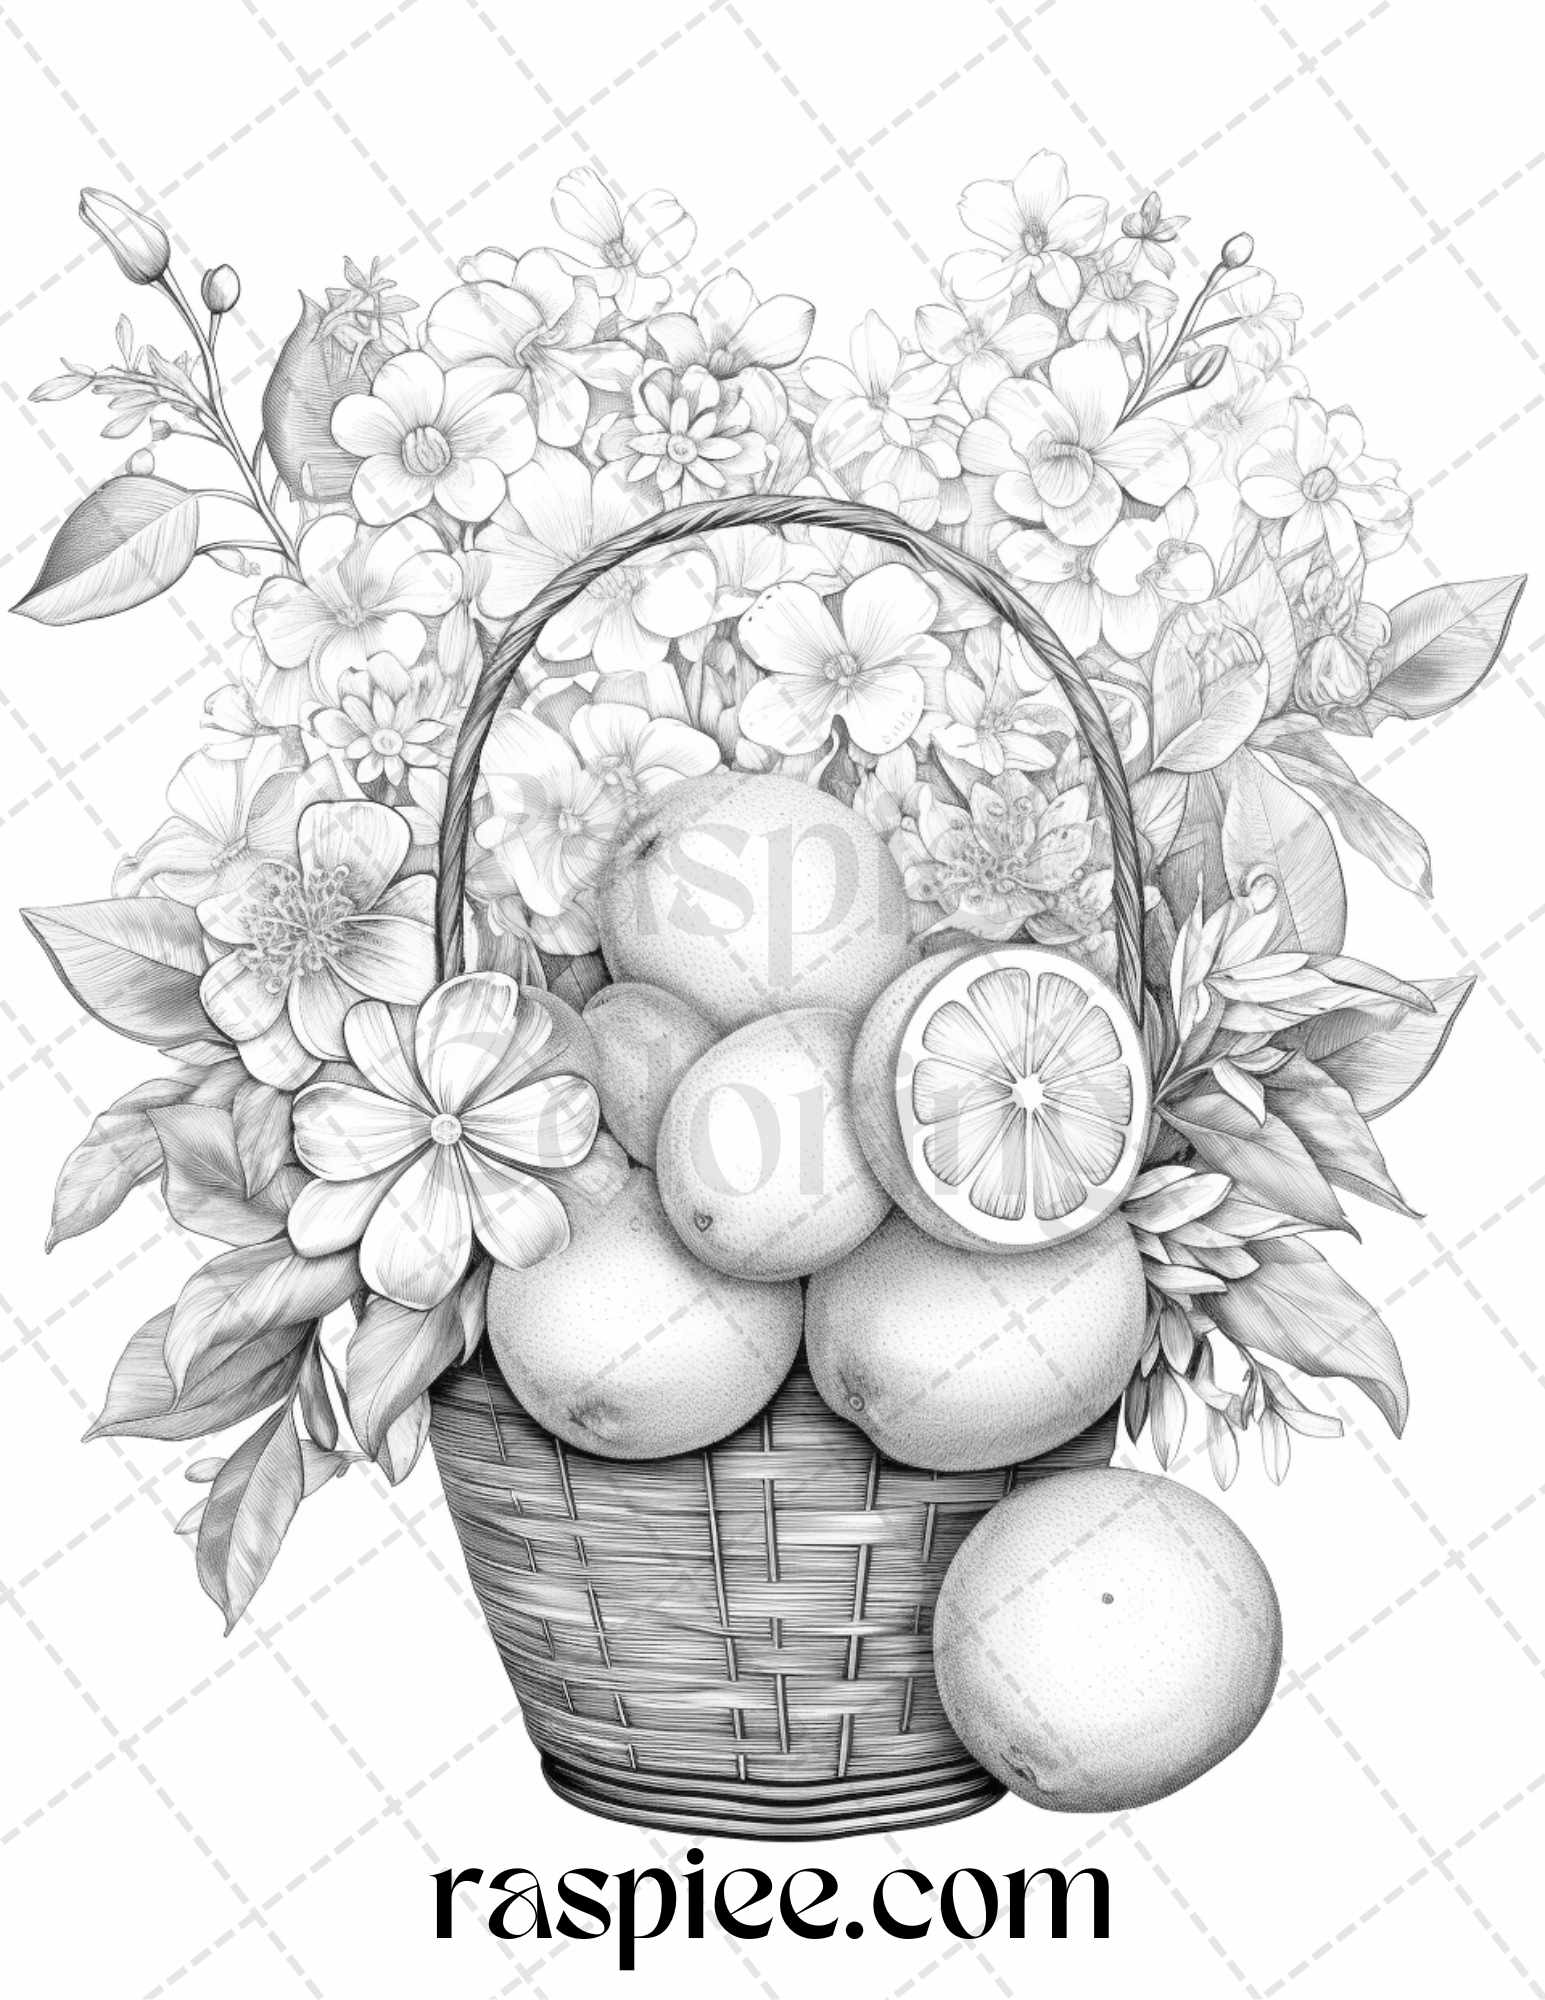 Drawing Basket of Fruit Art, fruits basket, watercolor Painting, angle png  | PNGEgg